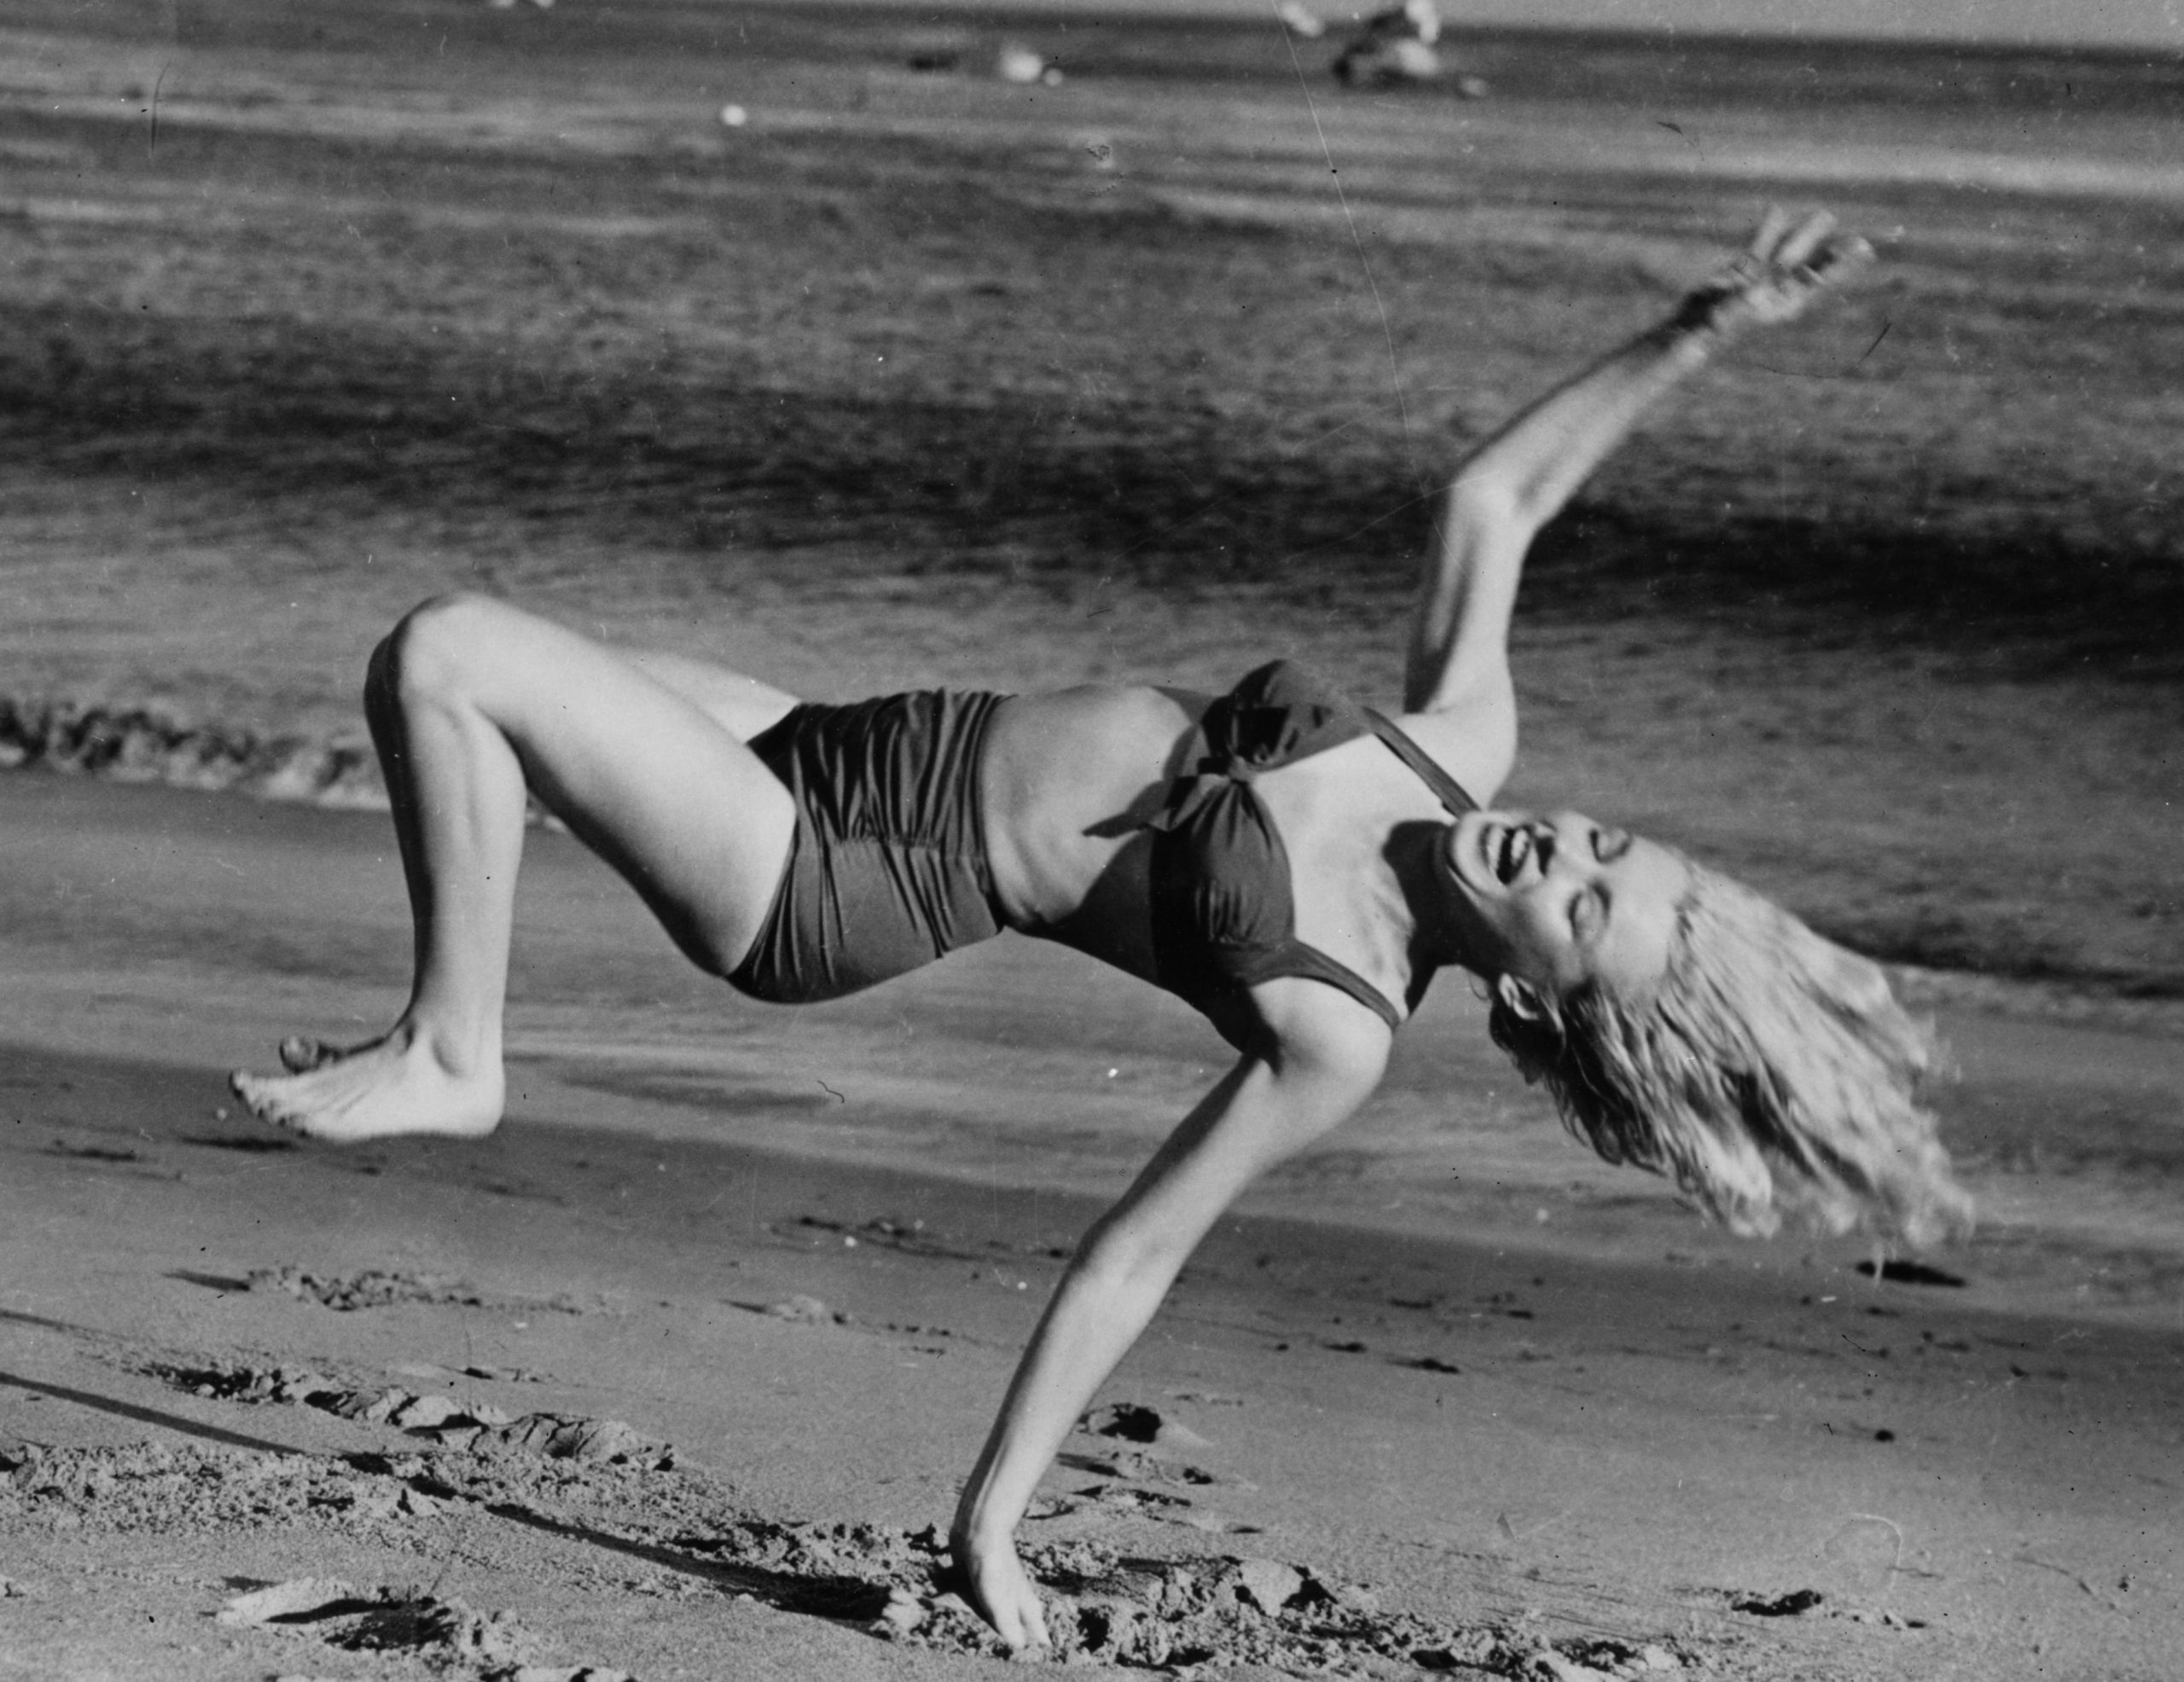 Timeless Treasures: Charming Retro Shots from the Beach